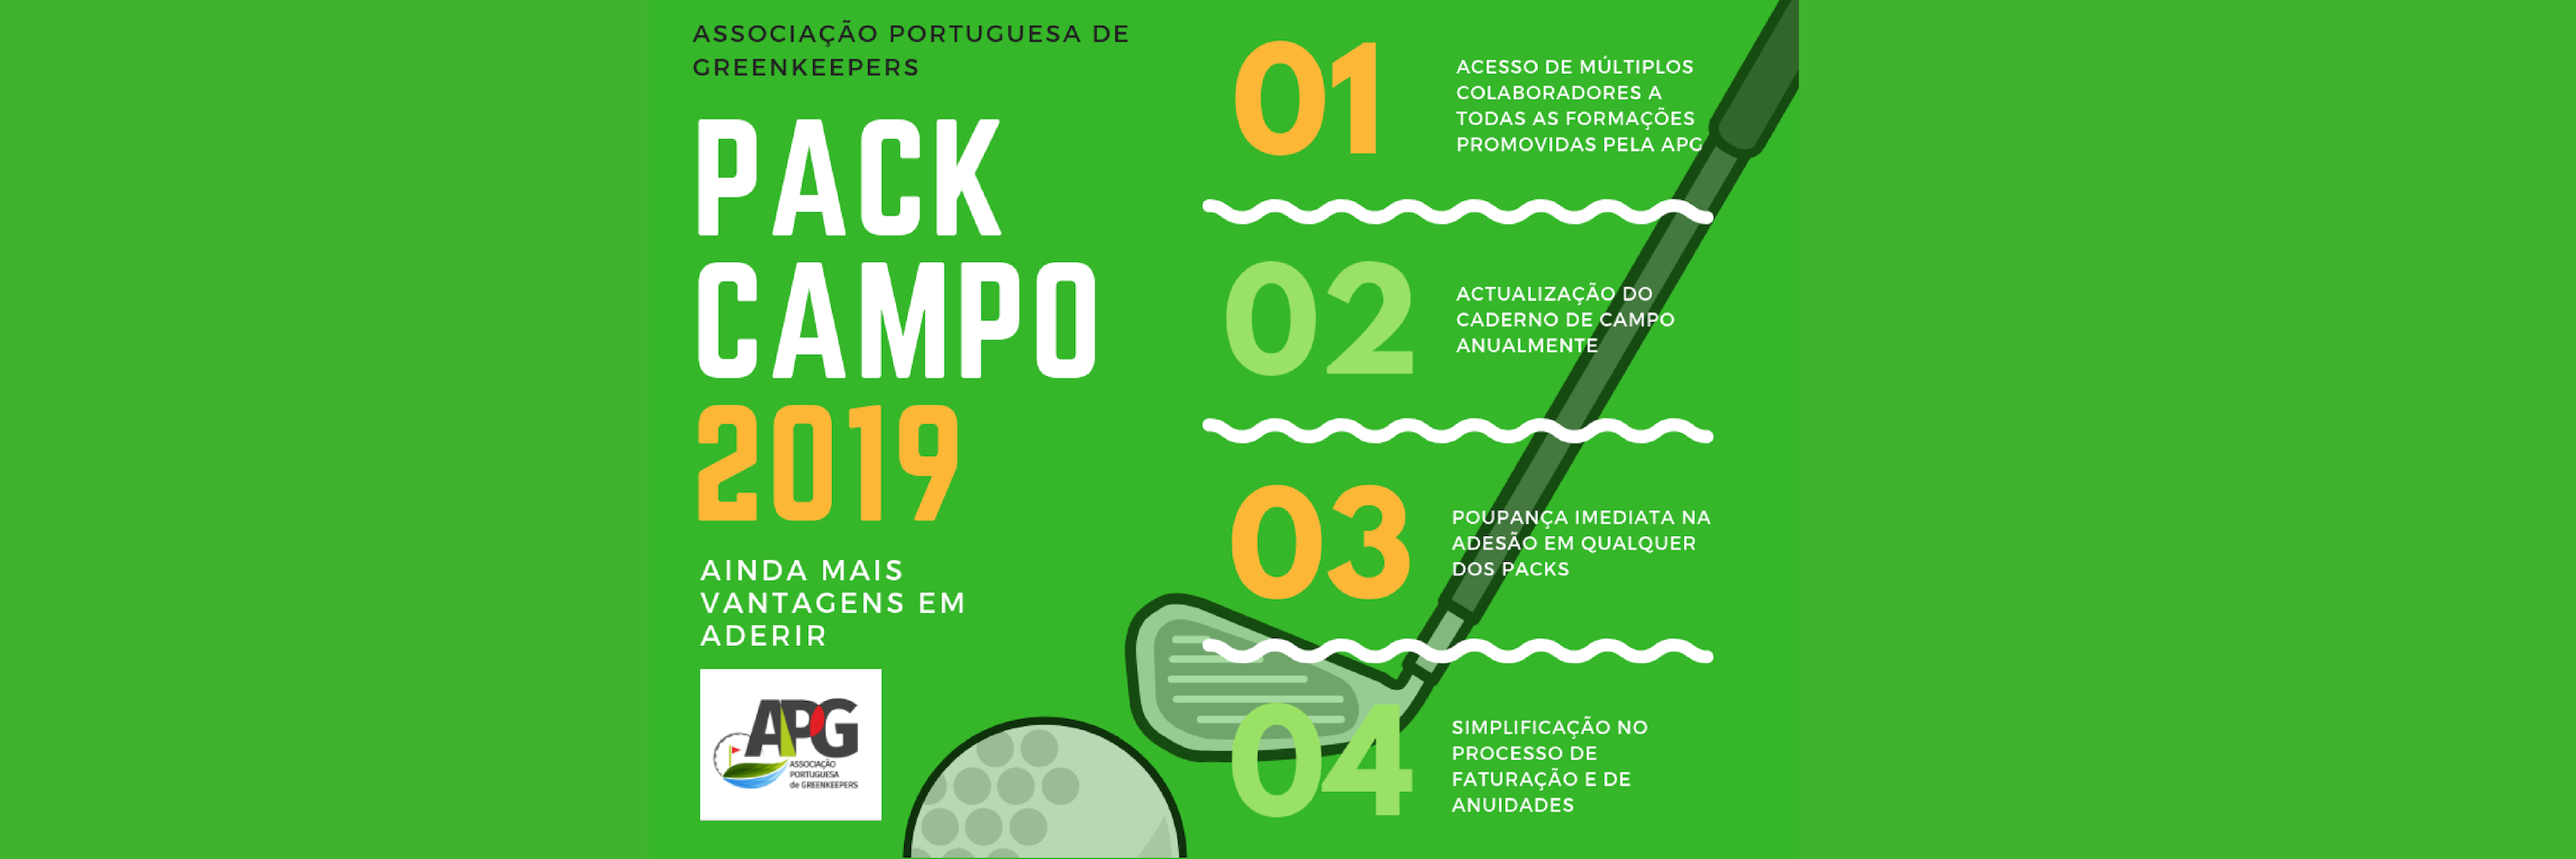 Pack Campo 2019